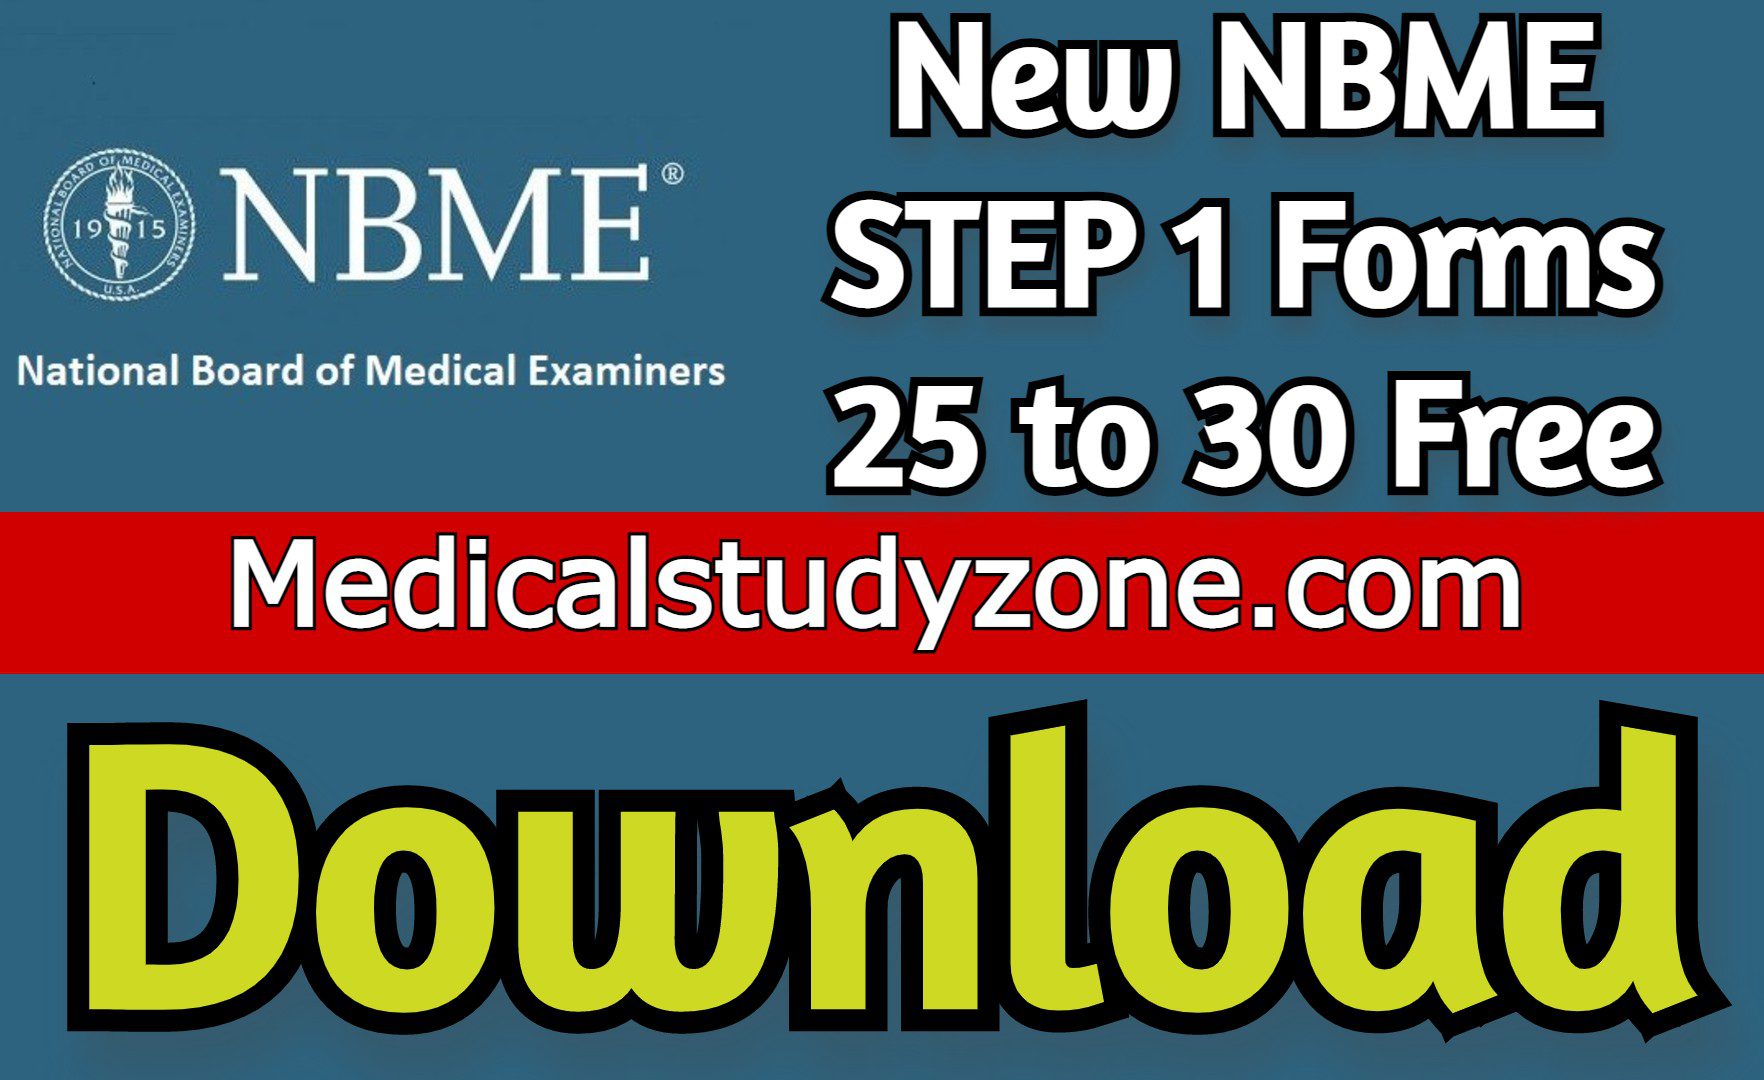 Download New NBME STEP 1 2022 Forms 25 to 30 Free - Medical Study Zone.